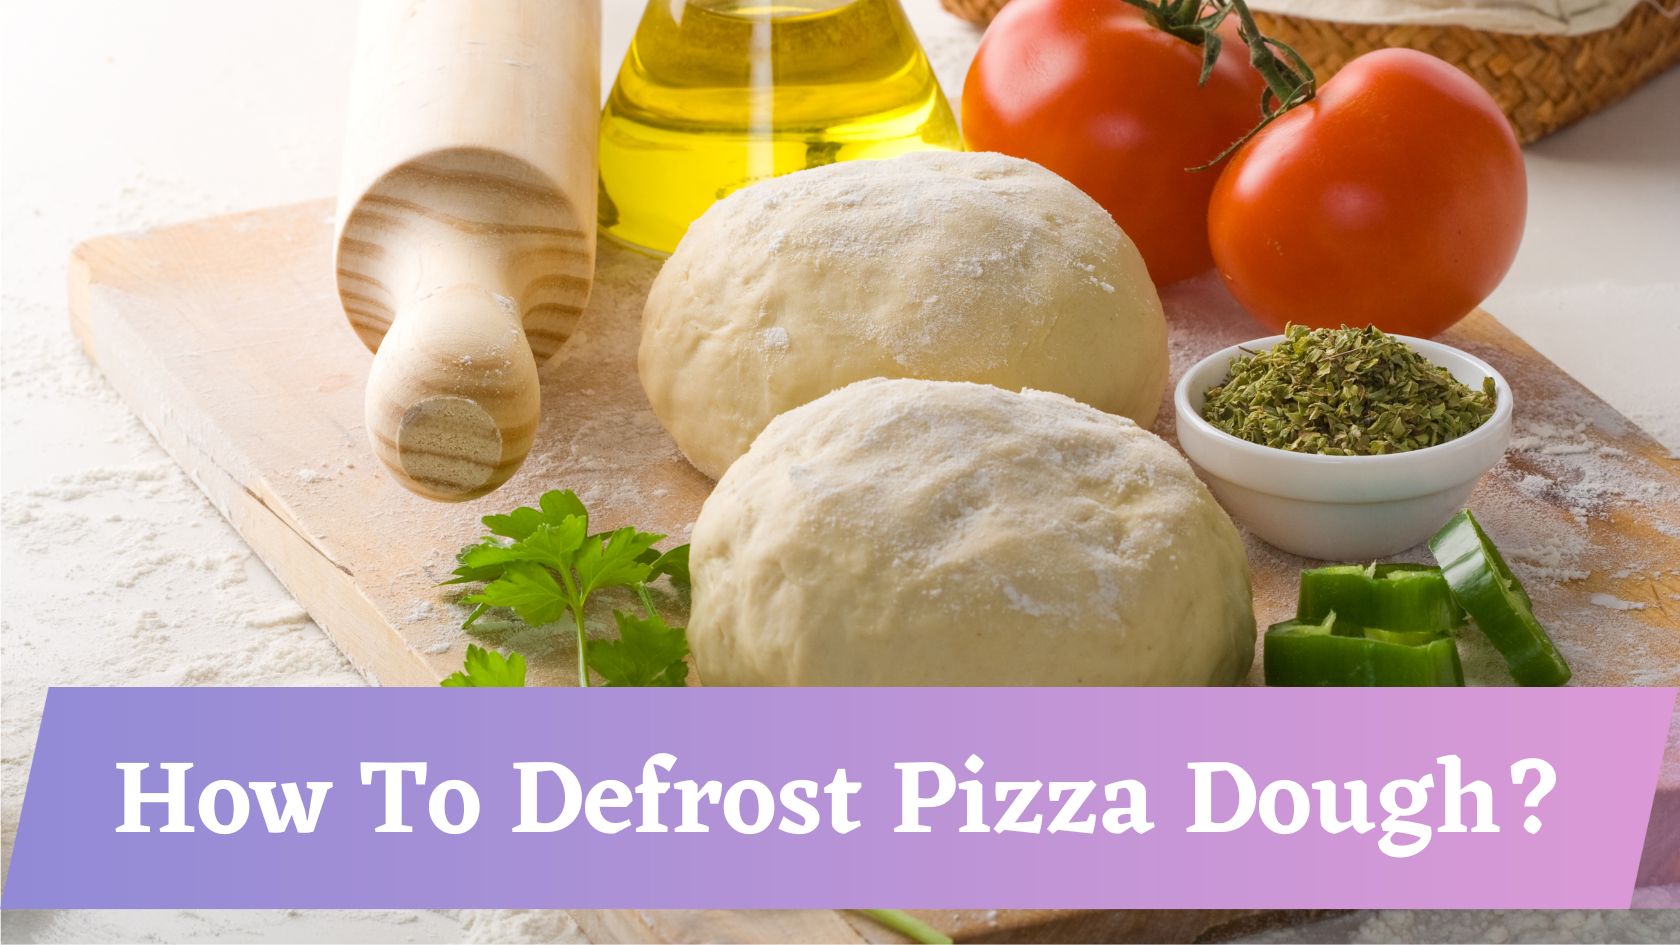 How To Defrost Pizza Dough